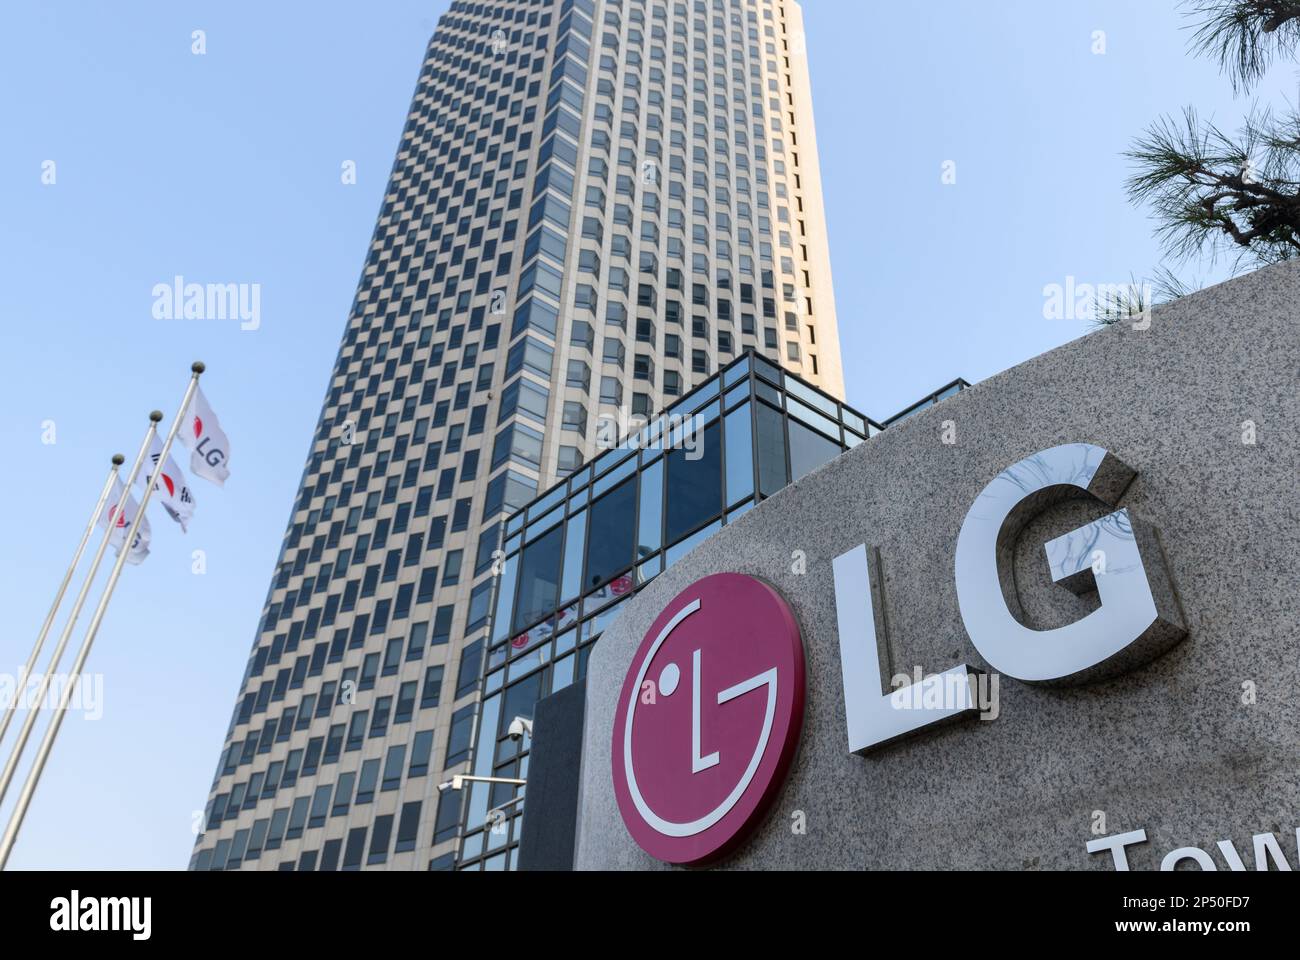 LG Group (@lg__group) • Instagram photos and videos